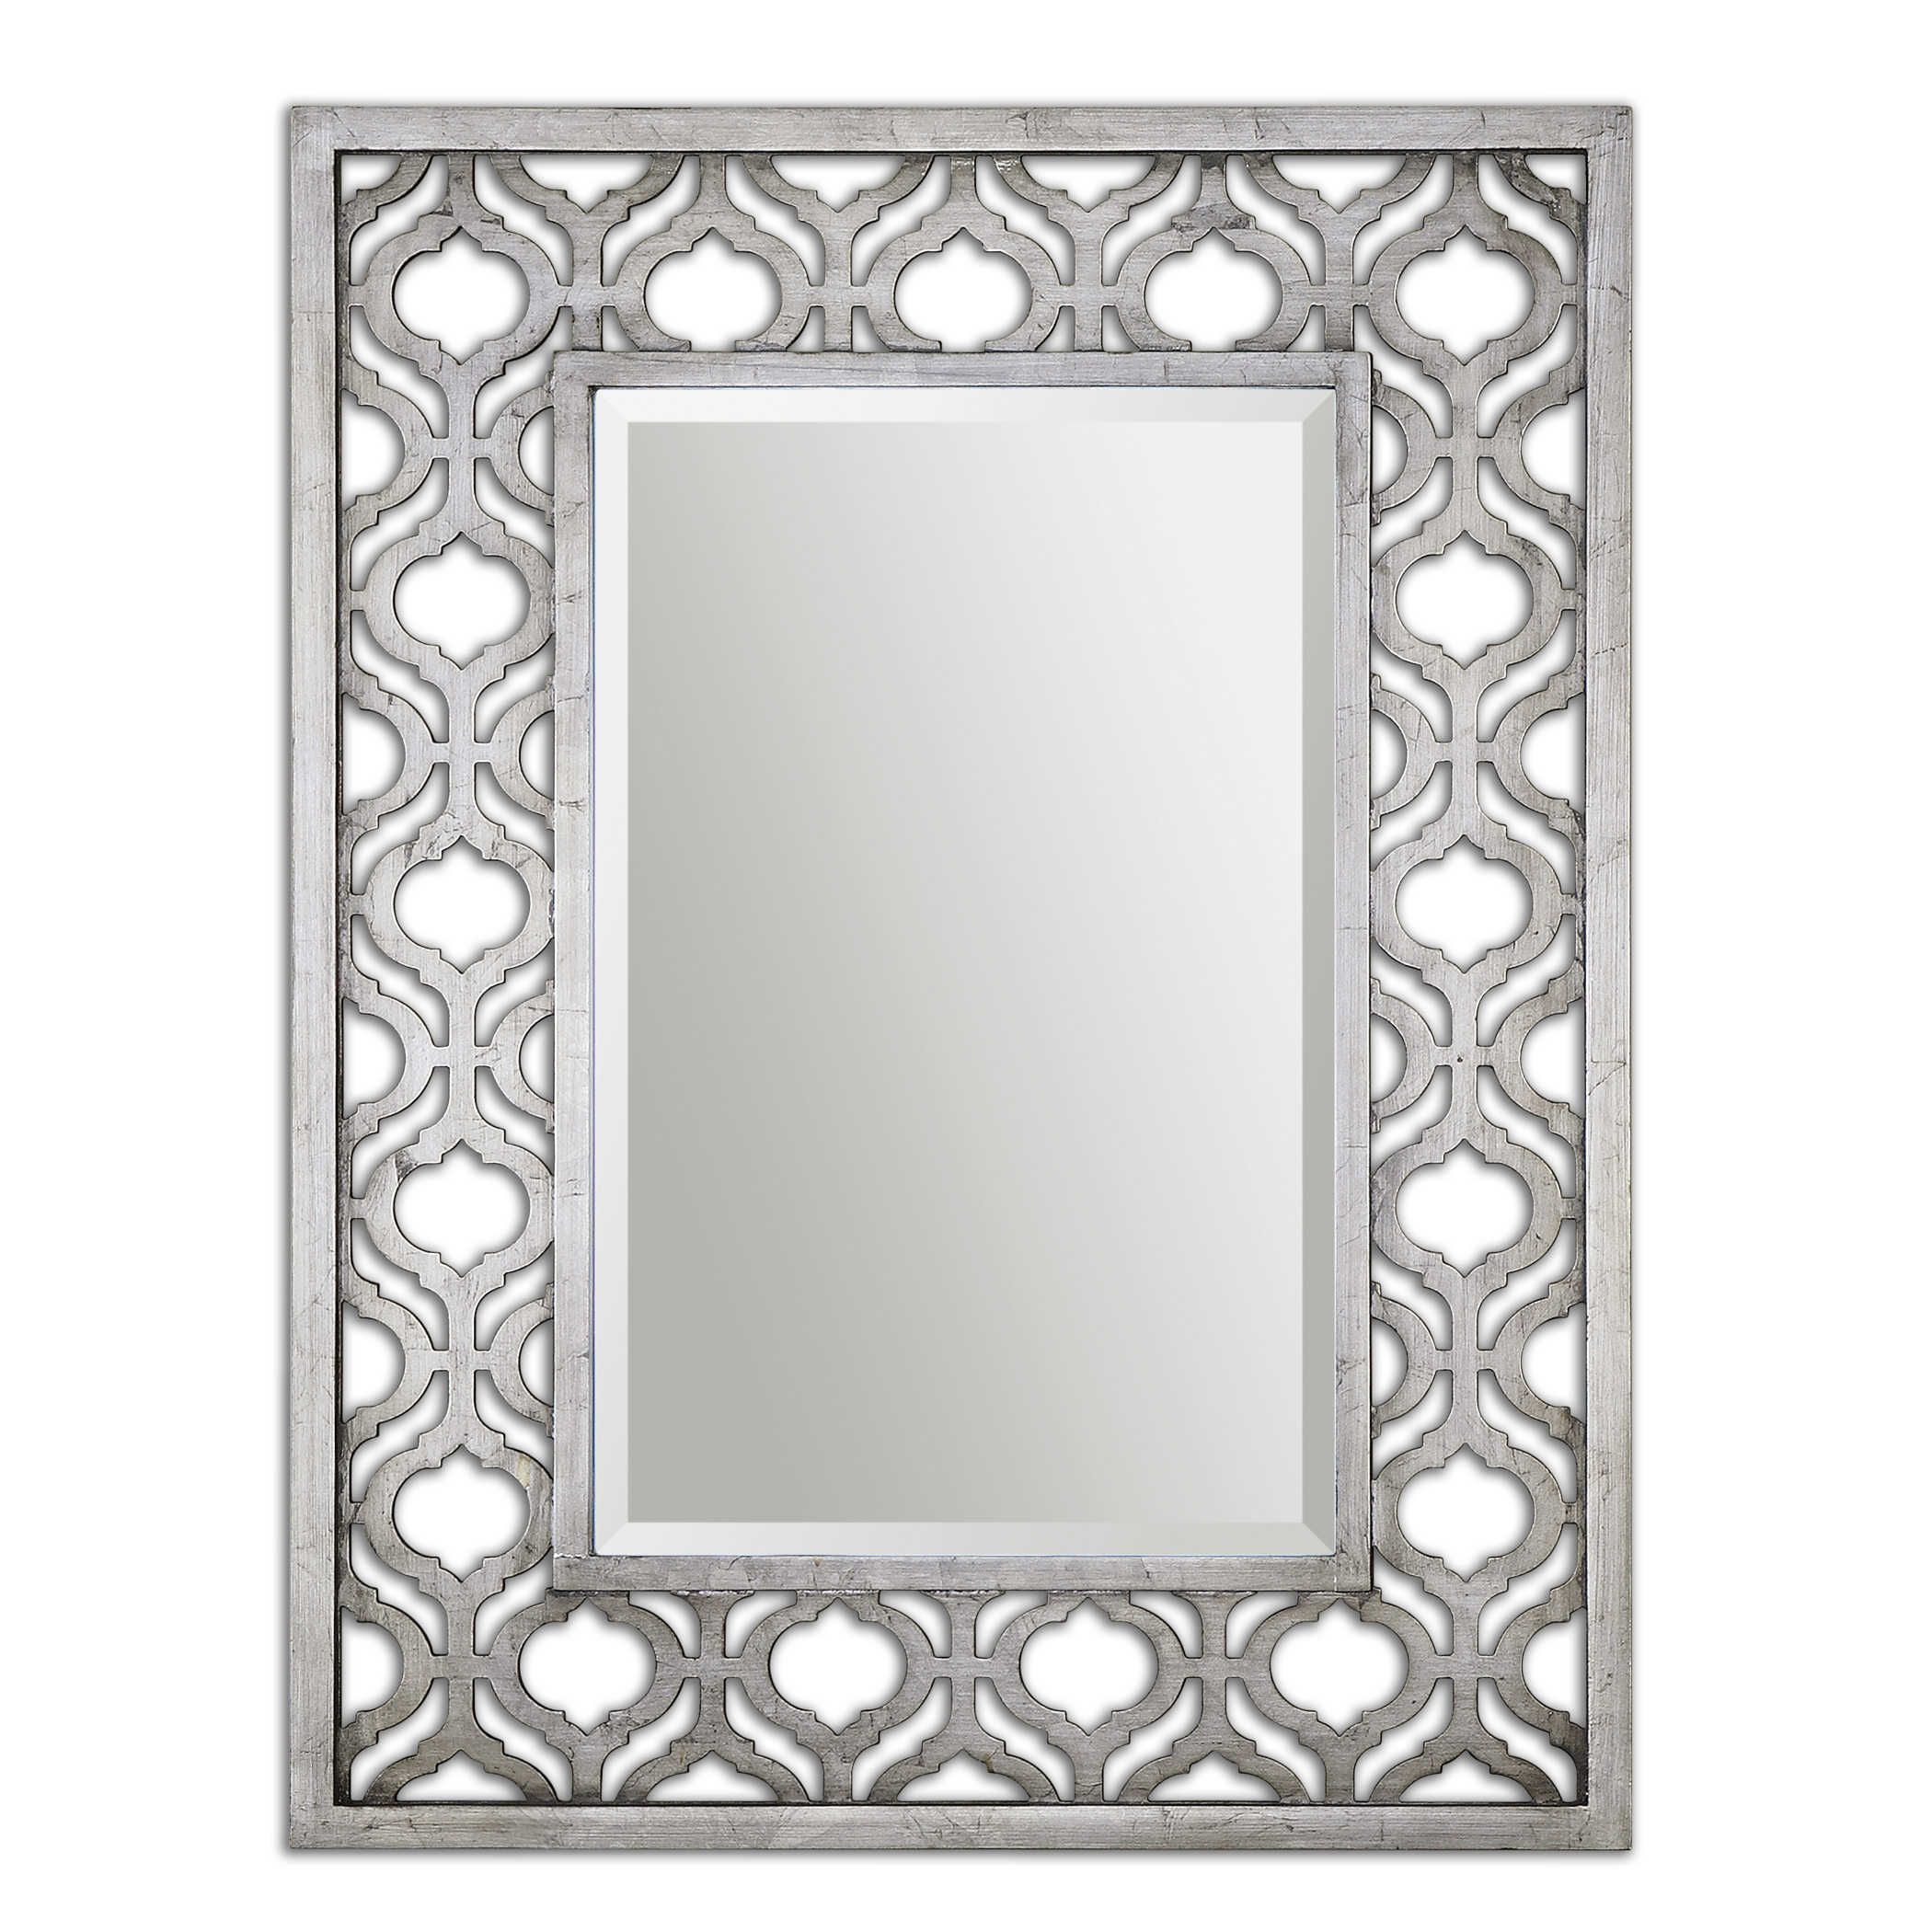 Decorative Antiqued Silver Leaf With Black Wall Mirror Large 40" Vanity In Silver Decorative Wall Mirrors (View 2 of 15)